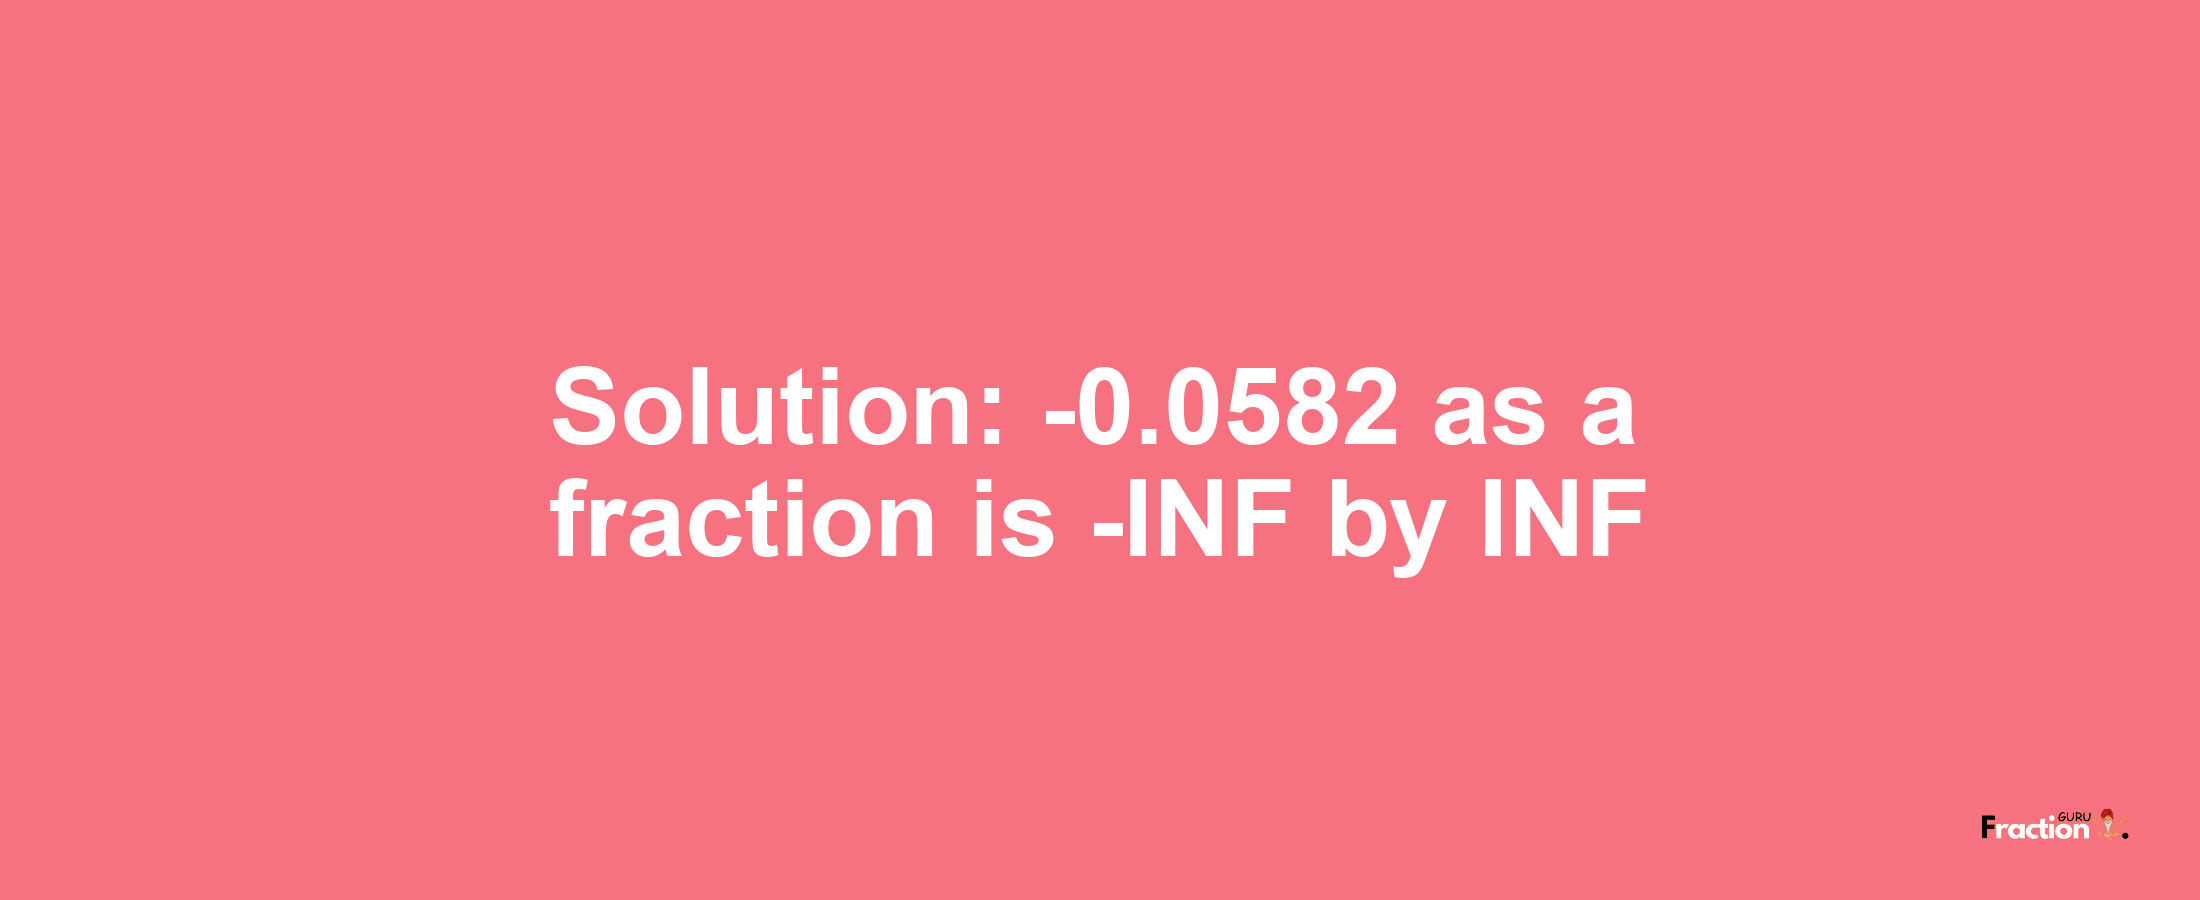 Solution:-0.0582 as a fraction is -INF/INF